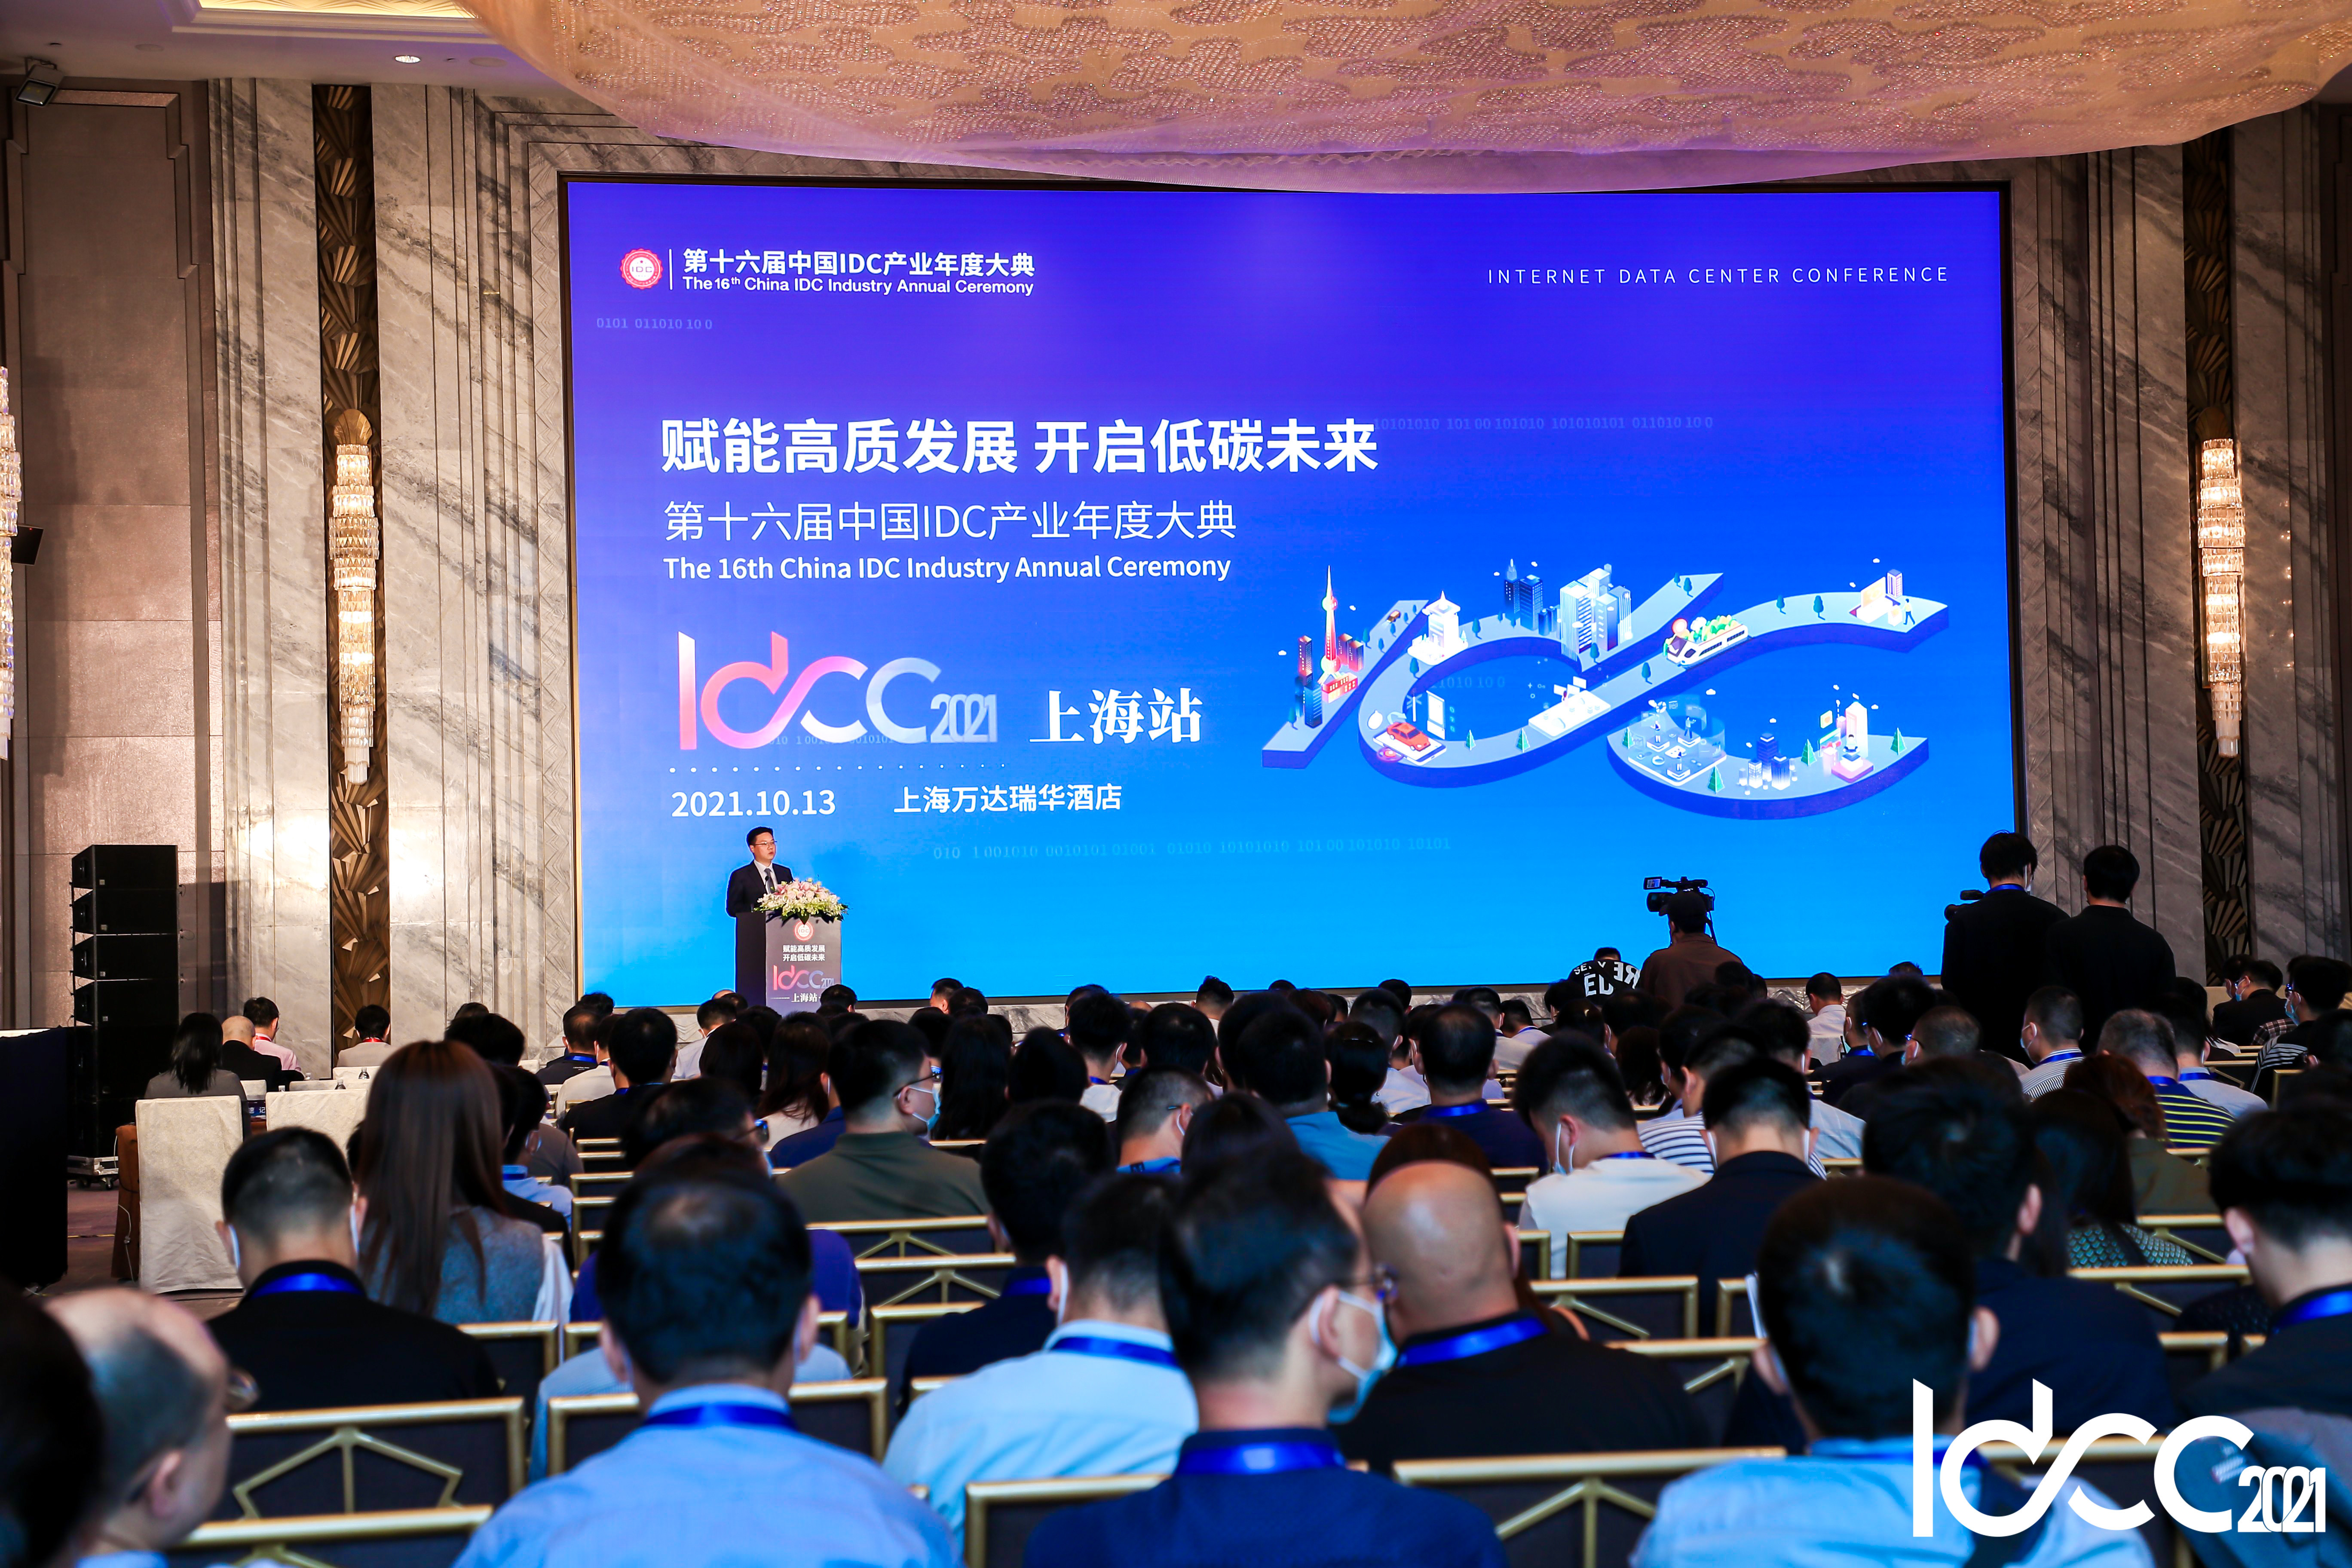 Low-carbon Practice and High-quality Development | Hotwon Group Attends IDCC2021 (Shanghai)